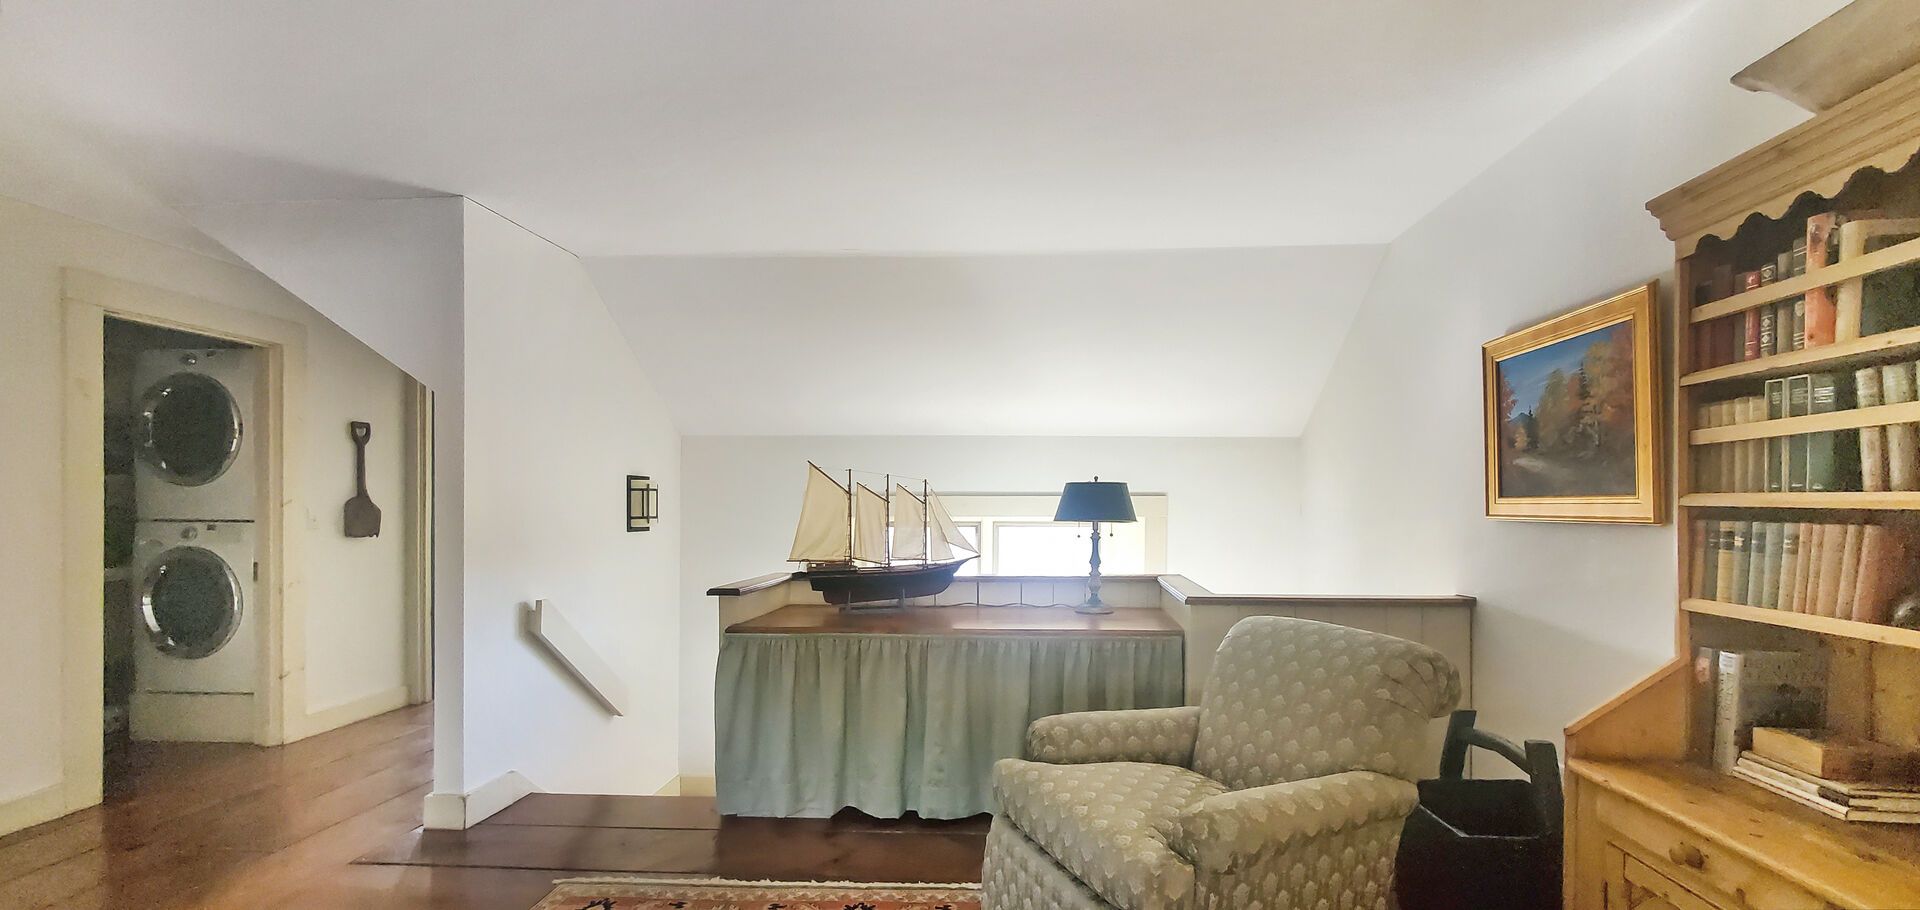 Upper level TV in Small sitting area with a laundry closet